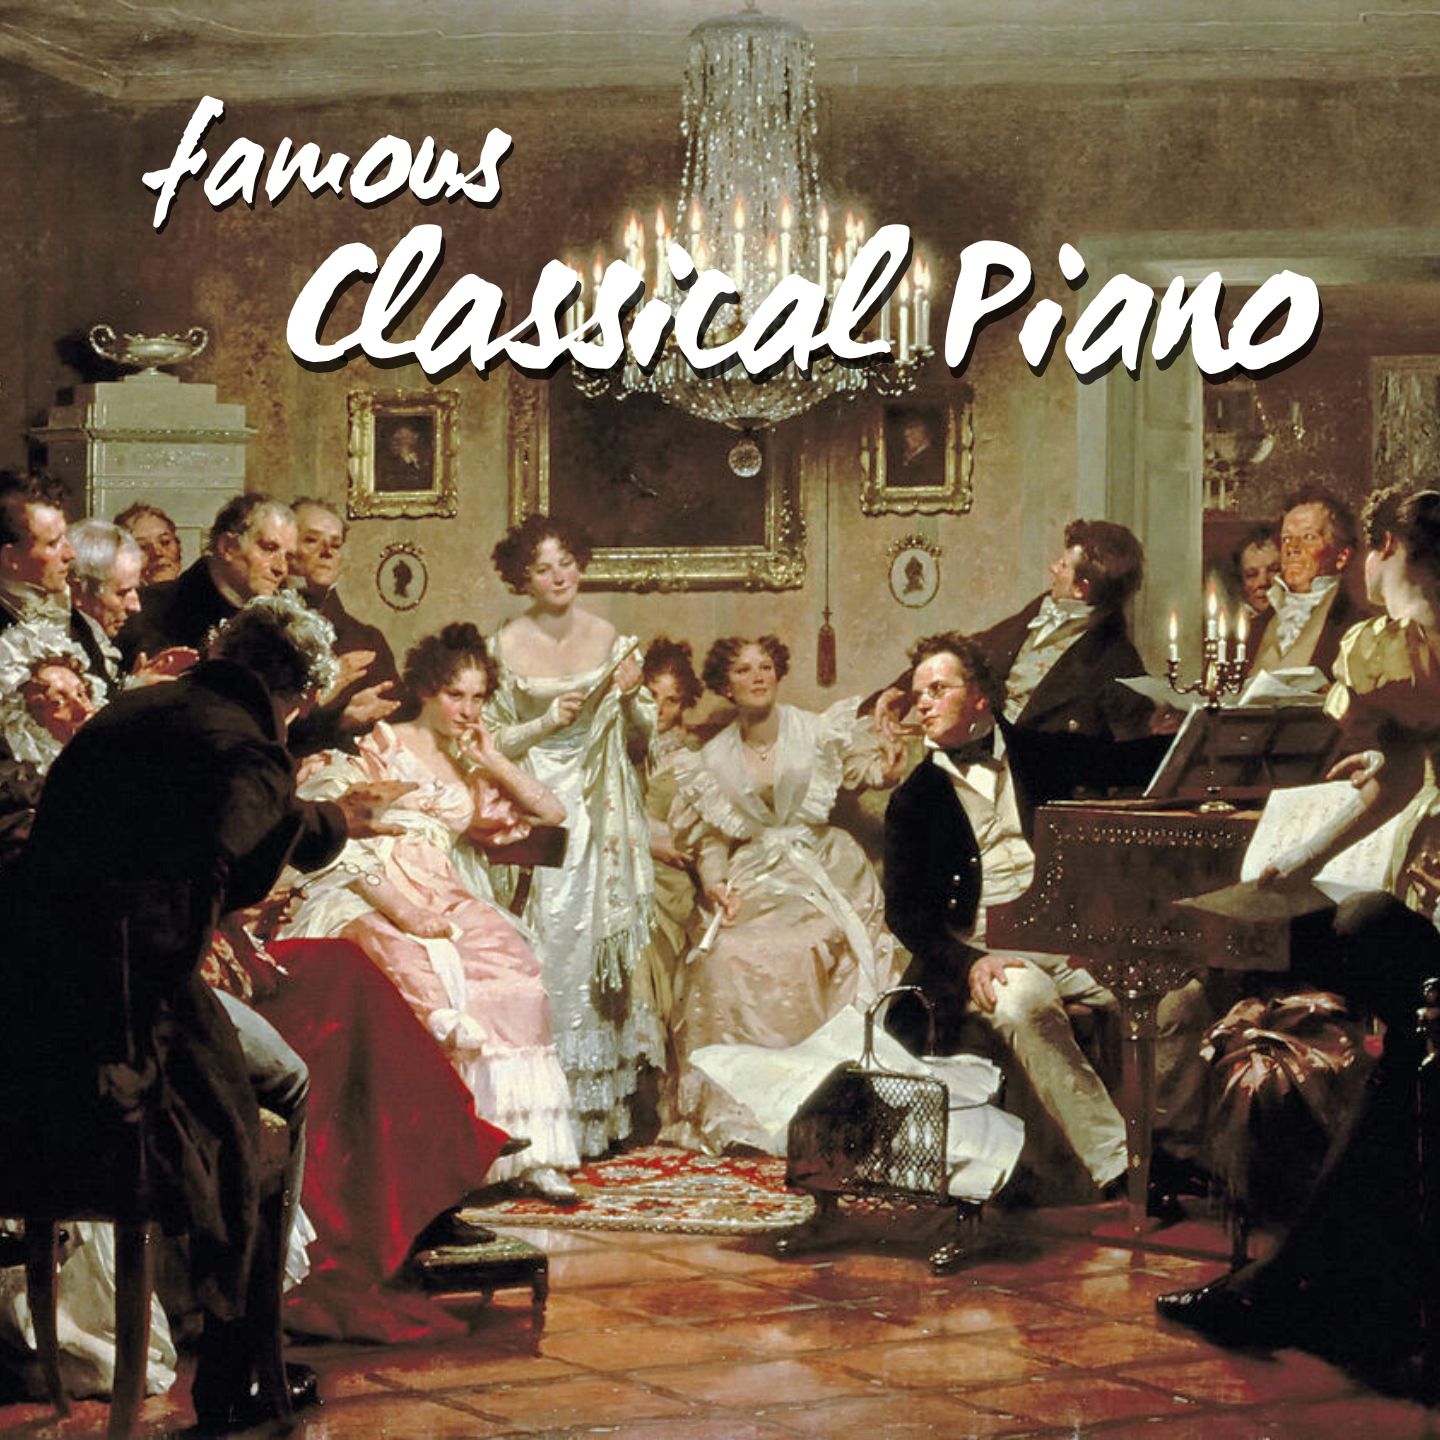 The Most Famous Classical Piano Pieces of All Time